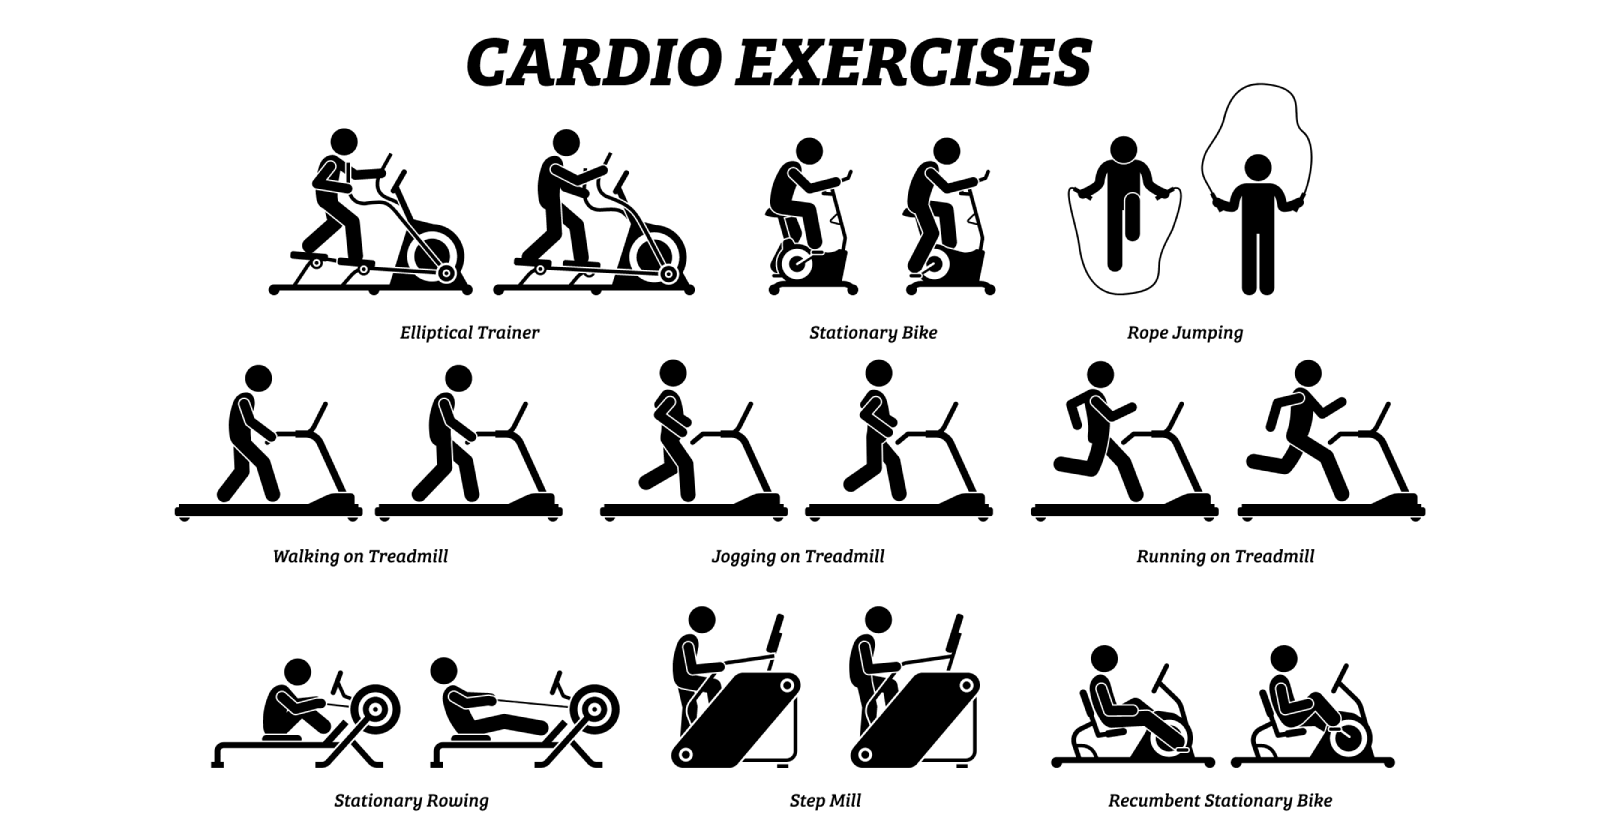 3 Best Cardio Exercises for Weight Loss